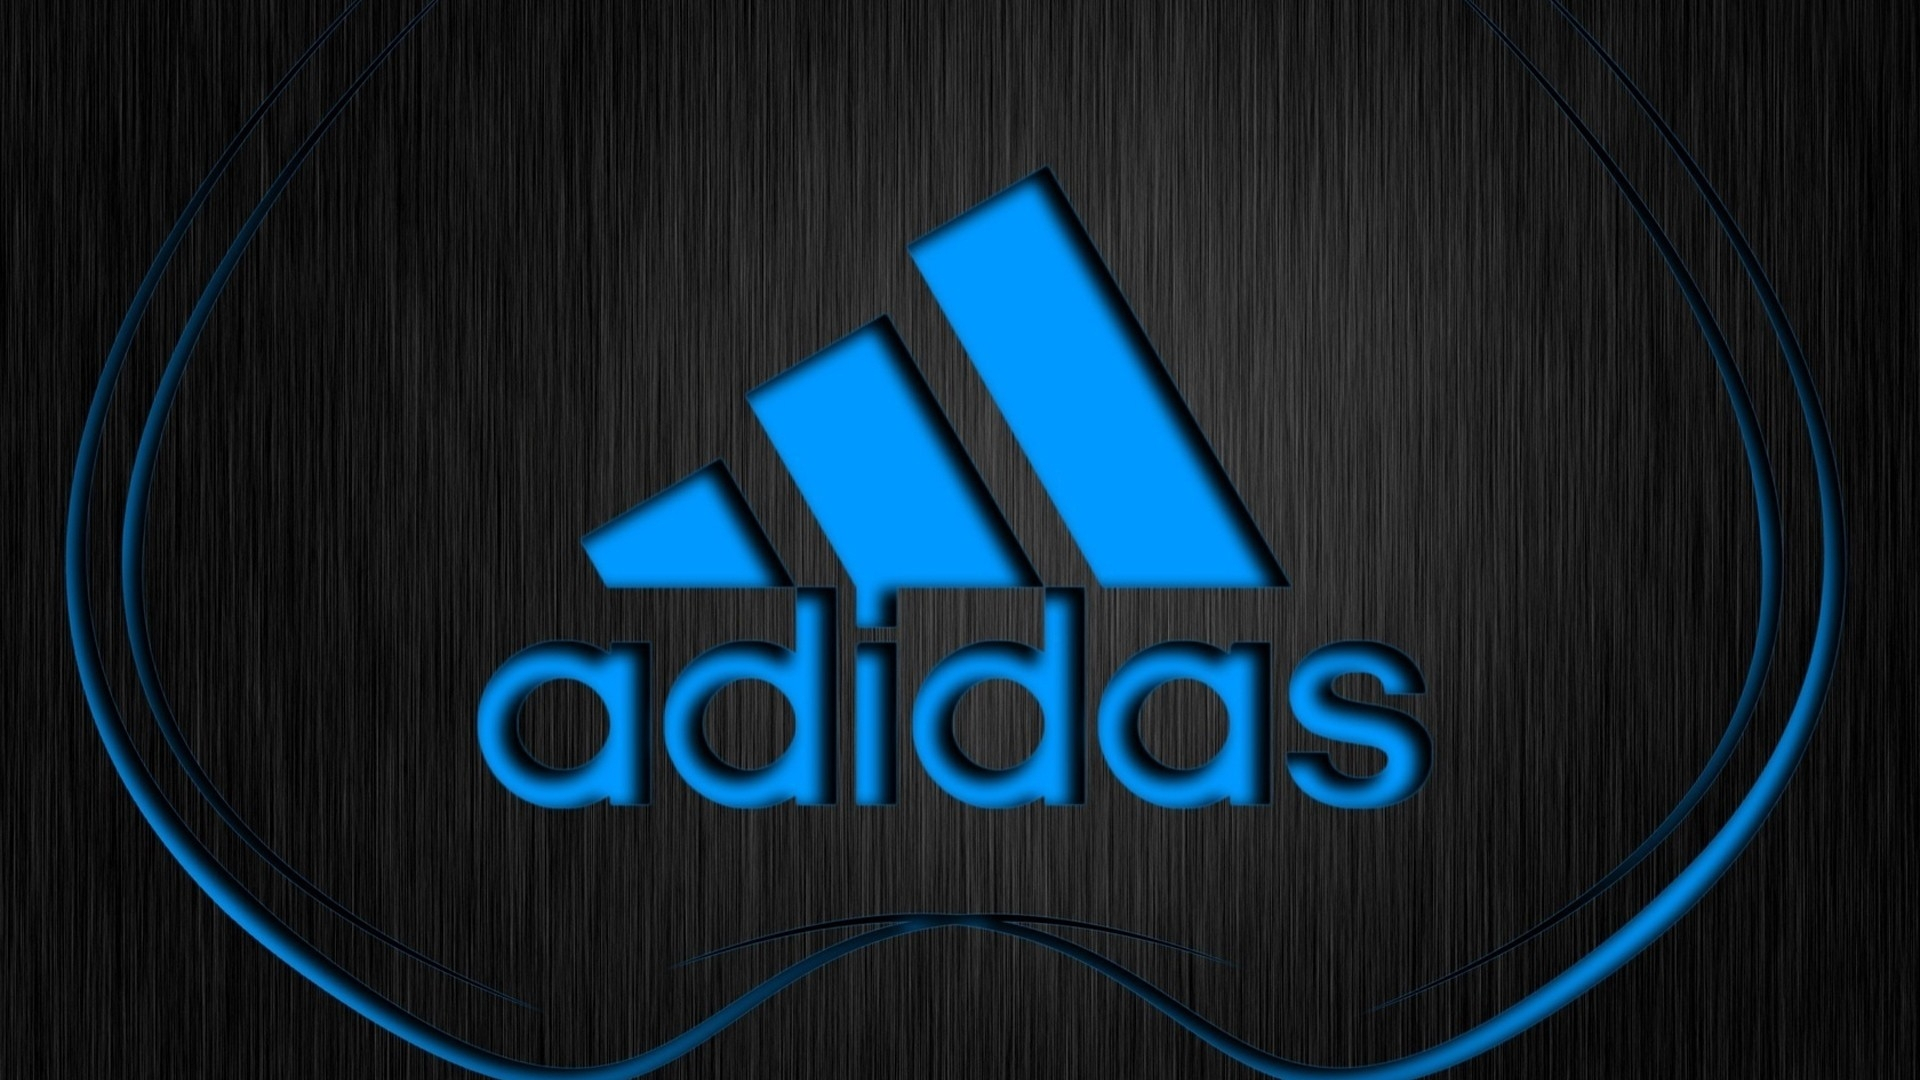 1920x1080 Wallpaper : Adidas, logo, firm, sports, lettering CoolWallpapers 643440 HD Wallpapers